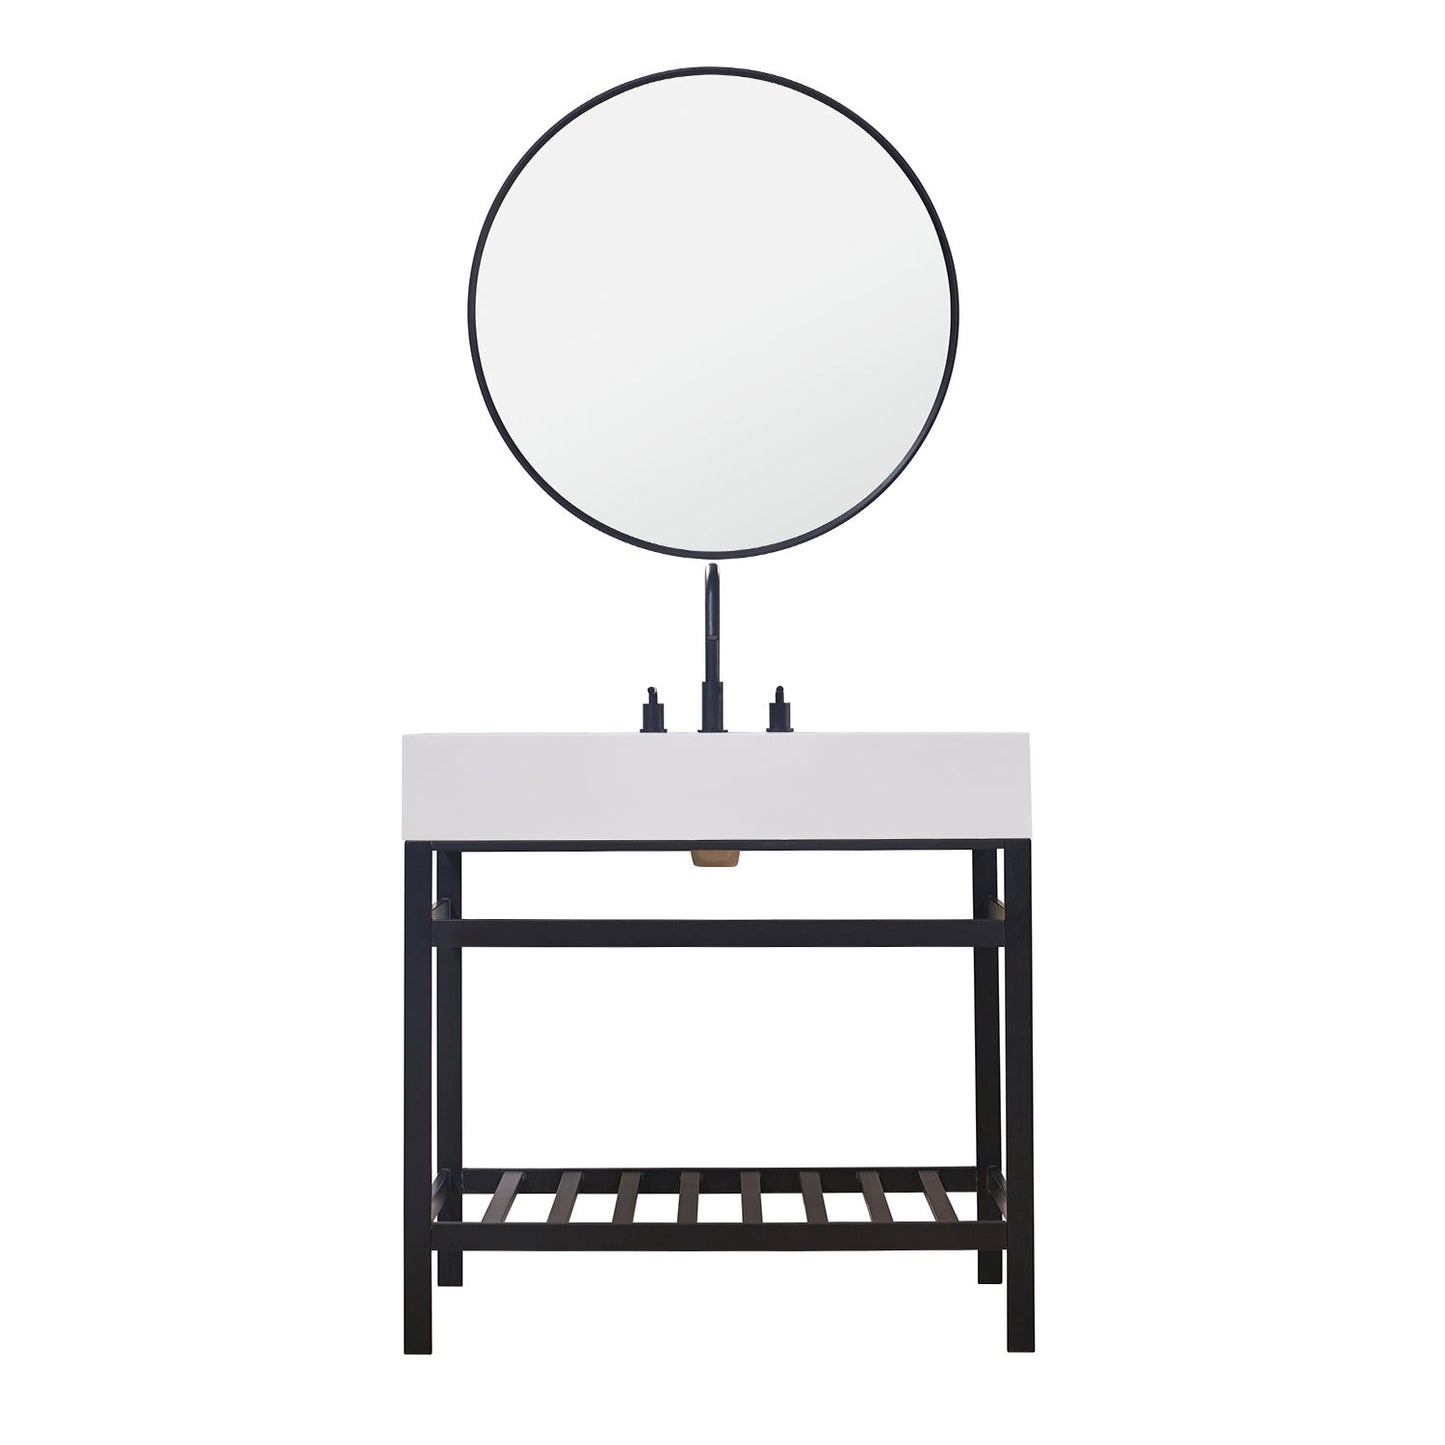 Edolo 36" Single Stainless Steel Vanity Console in Matt Black with Snow White Stone Countertop and Mirror